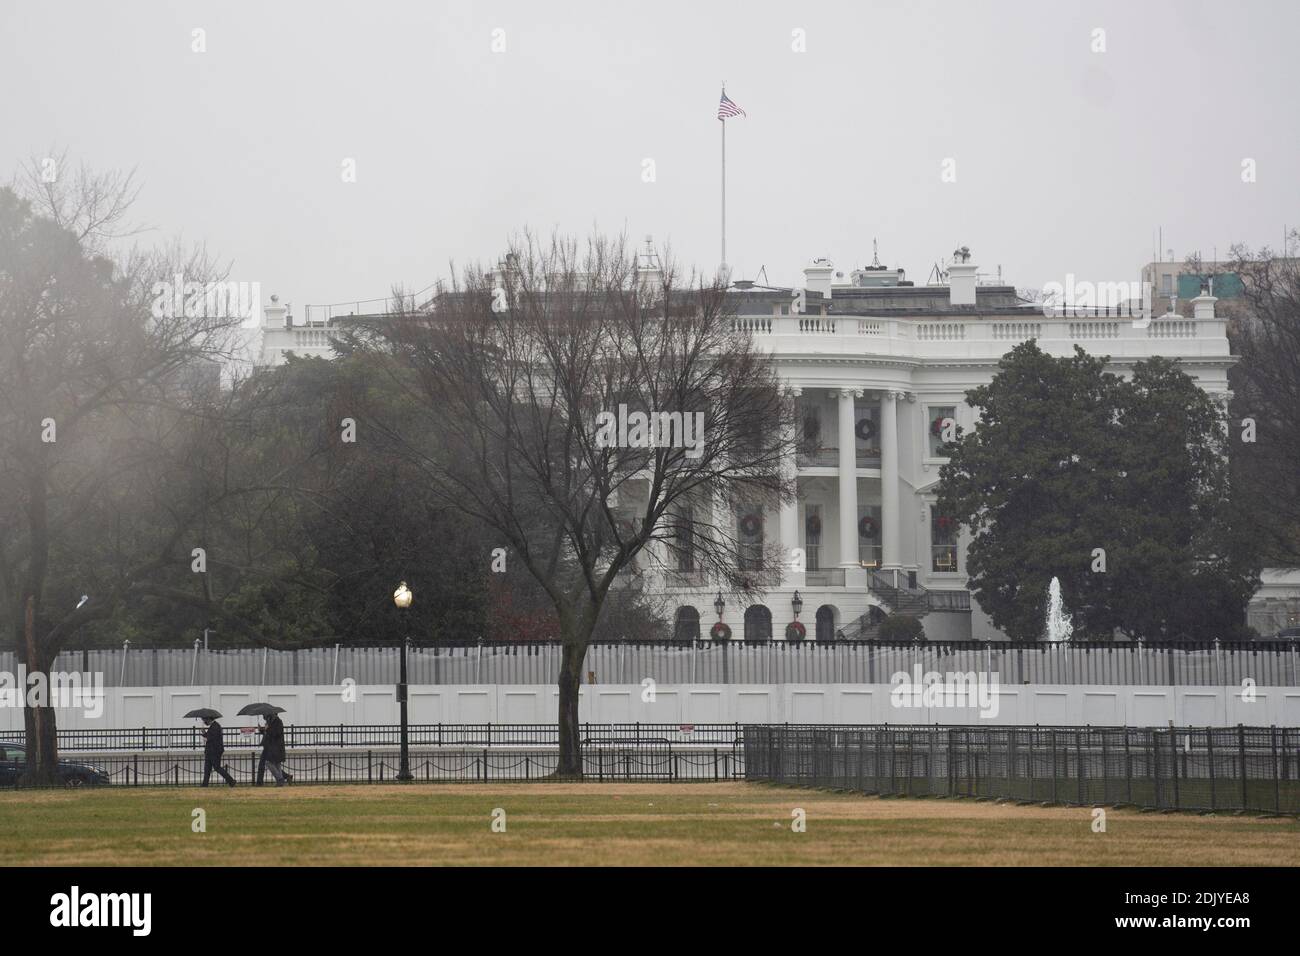 Washington, USA. 15th Dec, 2020. Photo taken on Dec. 14, 2020 shows the White House in the rain in Washington, DC, the United States. The U.S. Electoral College cast votes on Monday for a new president based on the 2020 election results, making Democrat Joe Biden's White House victory official. Credit: Liu Jie/Xinhua/Alamy Live News Stock Photo